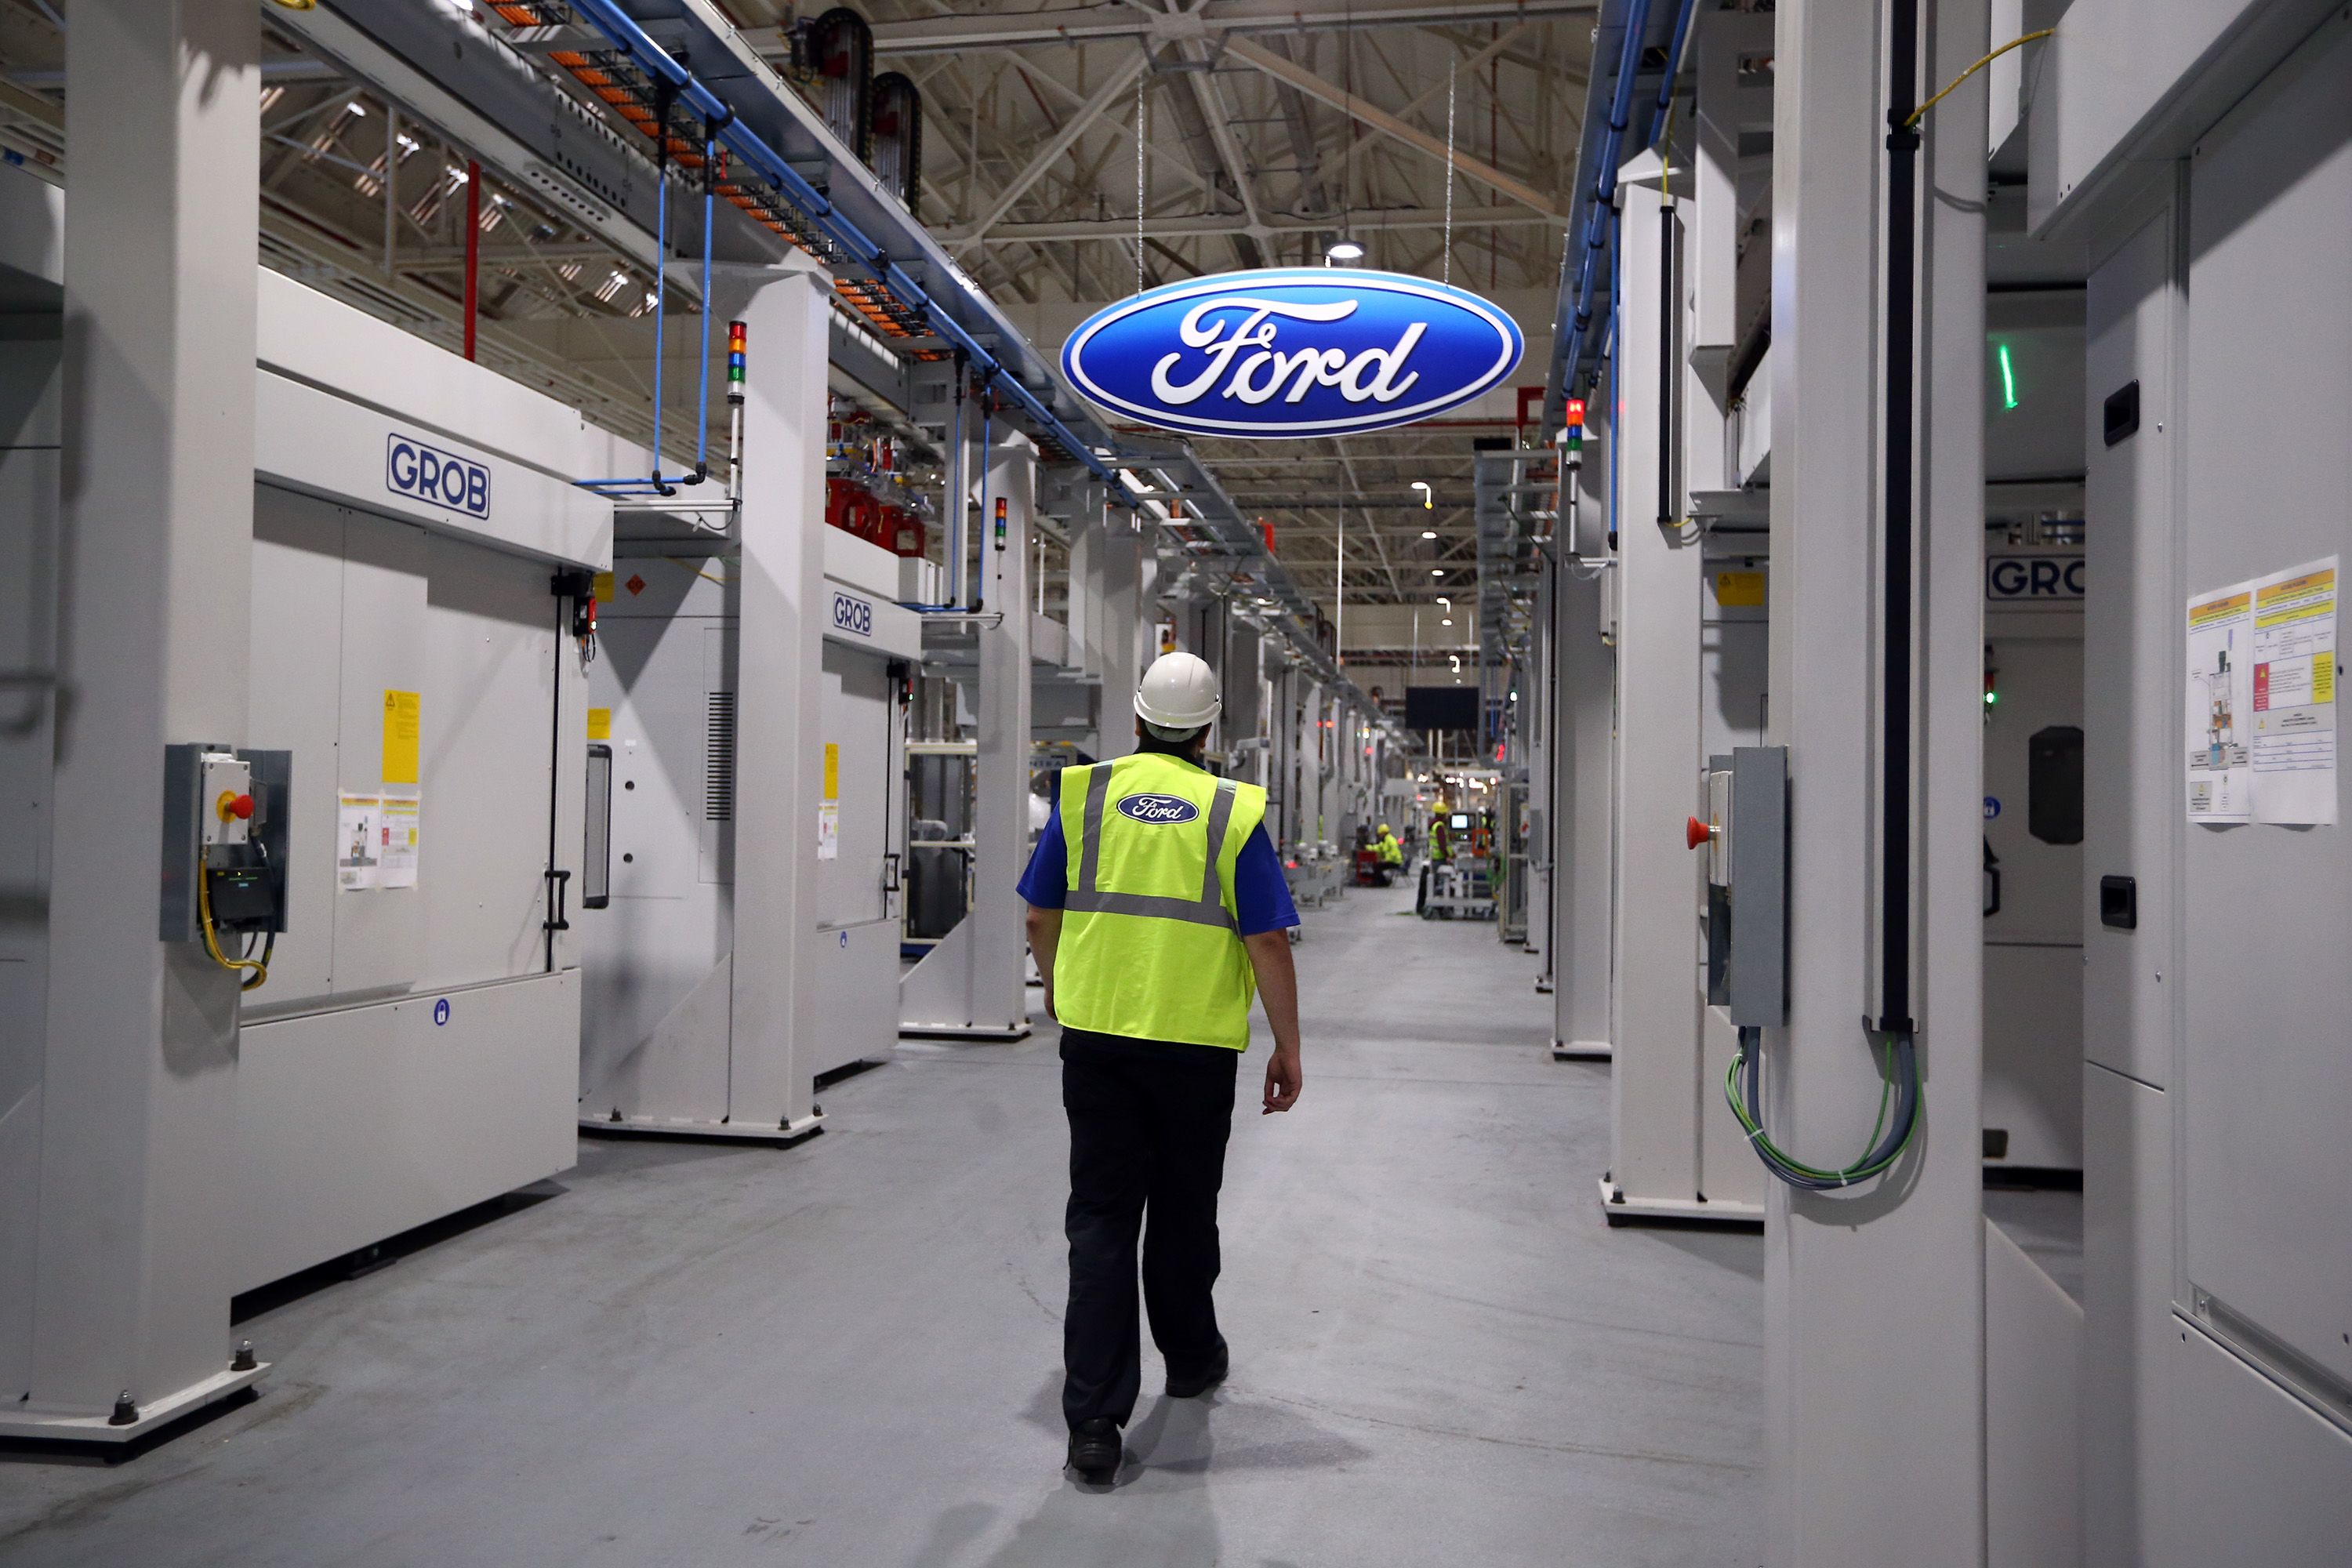 Ford recycles1.2 billion plastic bottles a year for auto parts